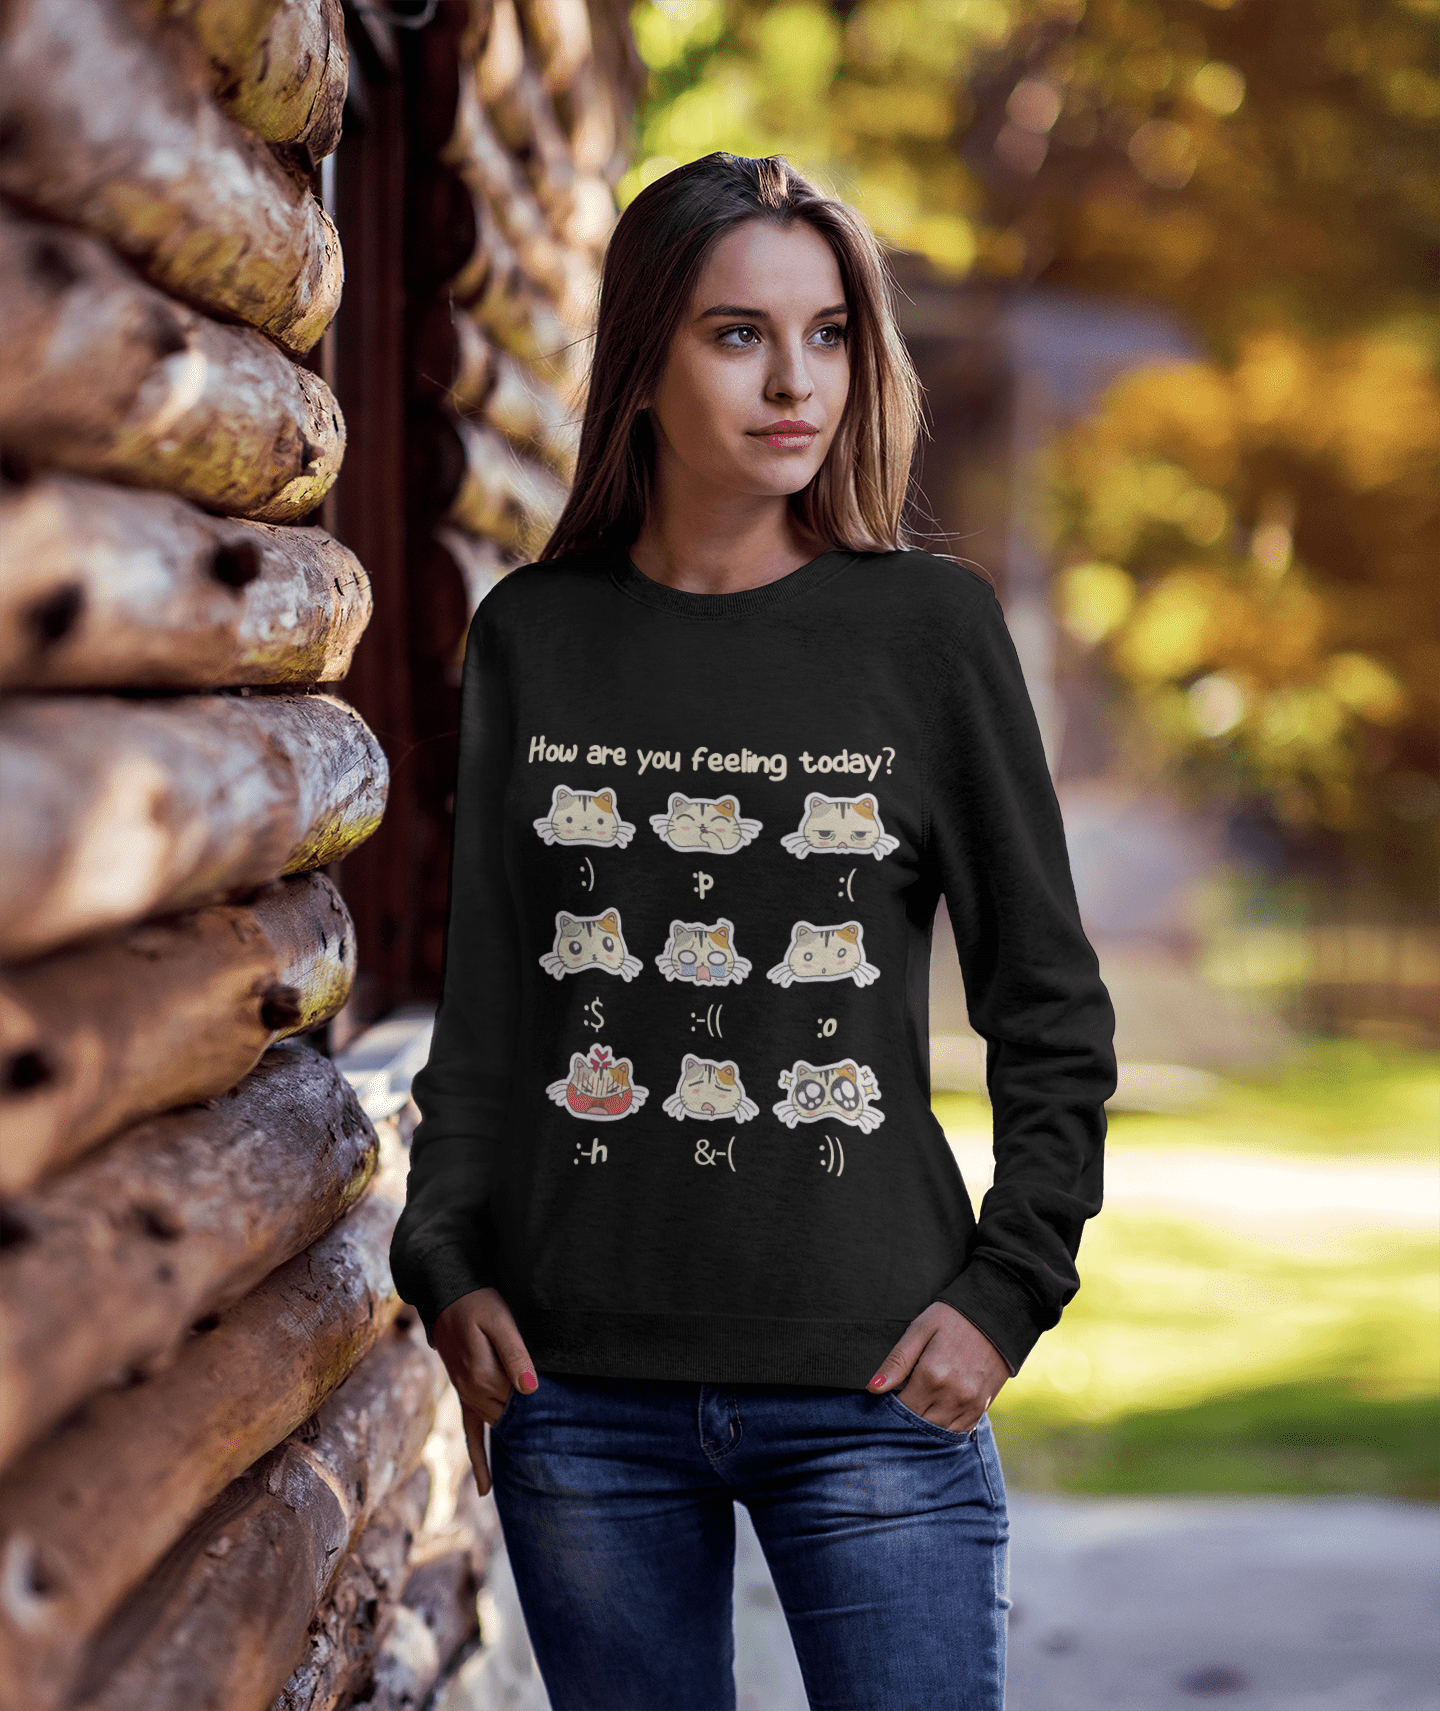 ULTRABASIC Women's Sweatshirt How are You Feeling Today - Funny Cat Kitty Lover Sweater